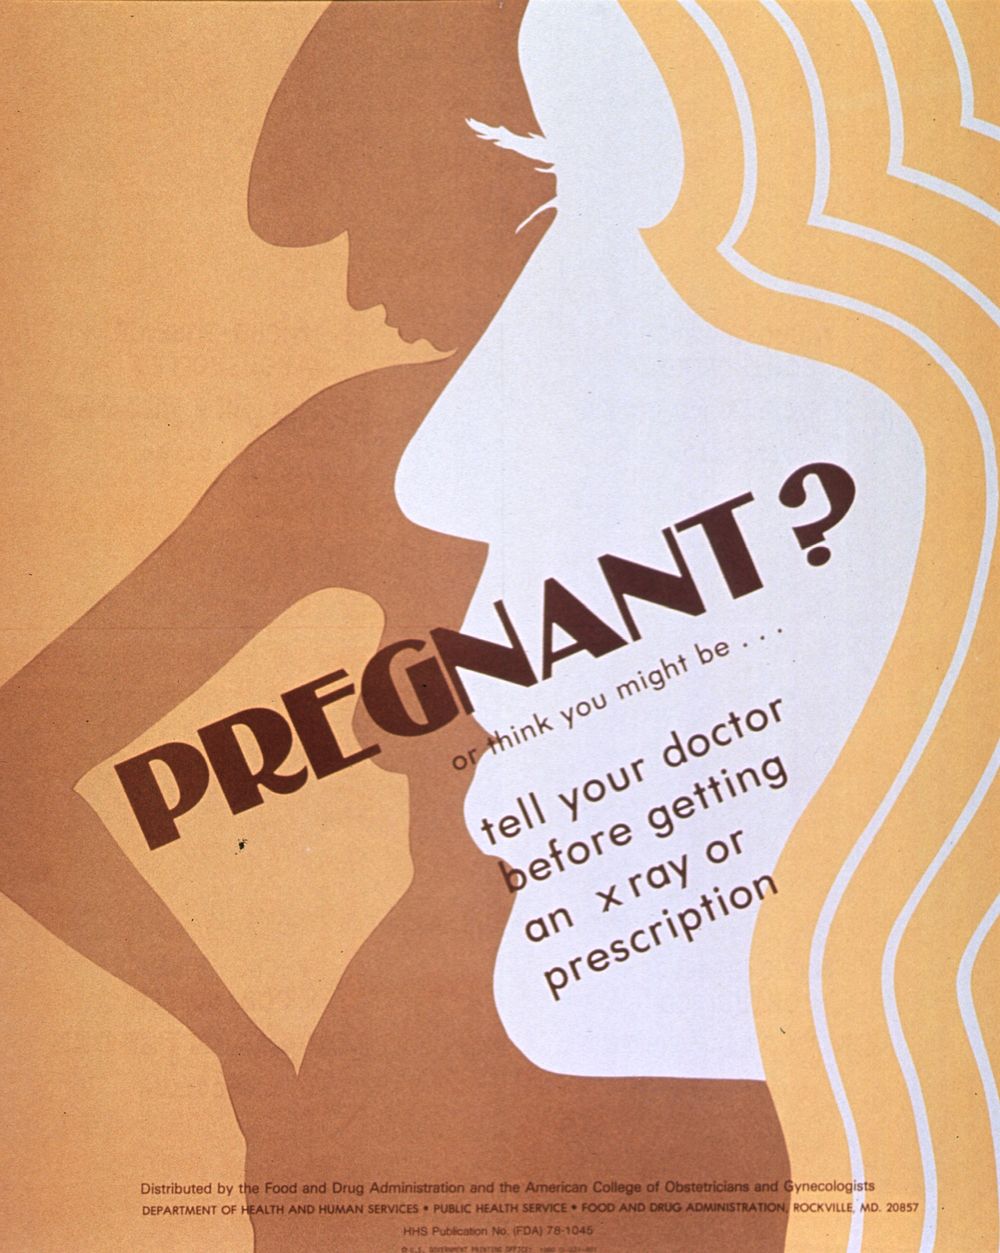 Pregnant?: Or Think You Might Be? Vintage poster.